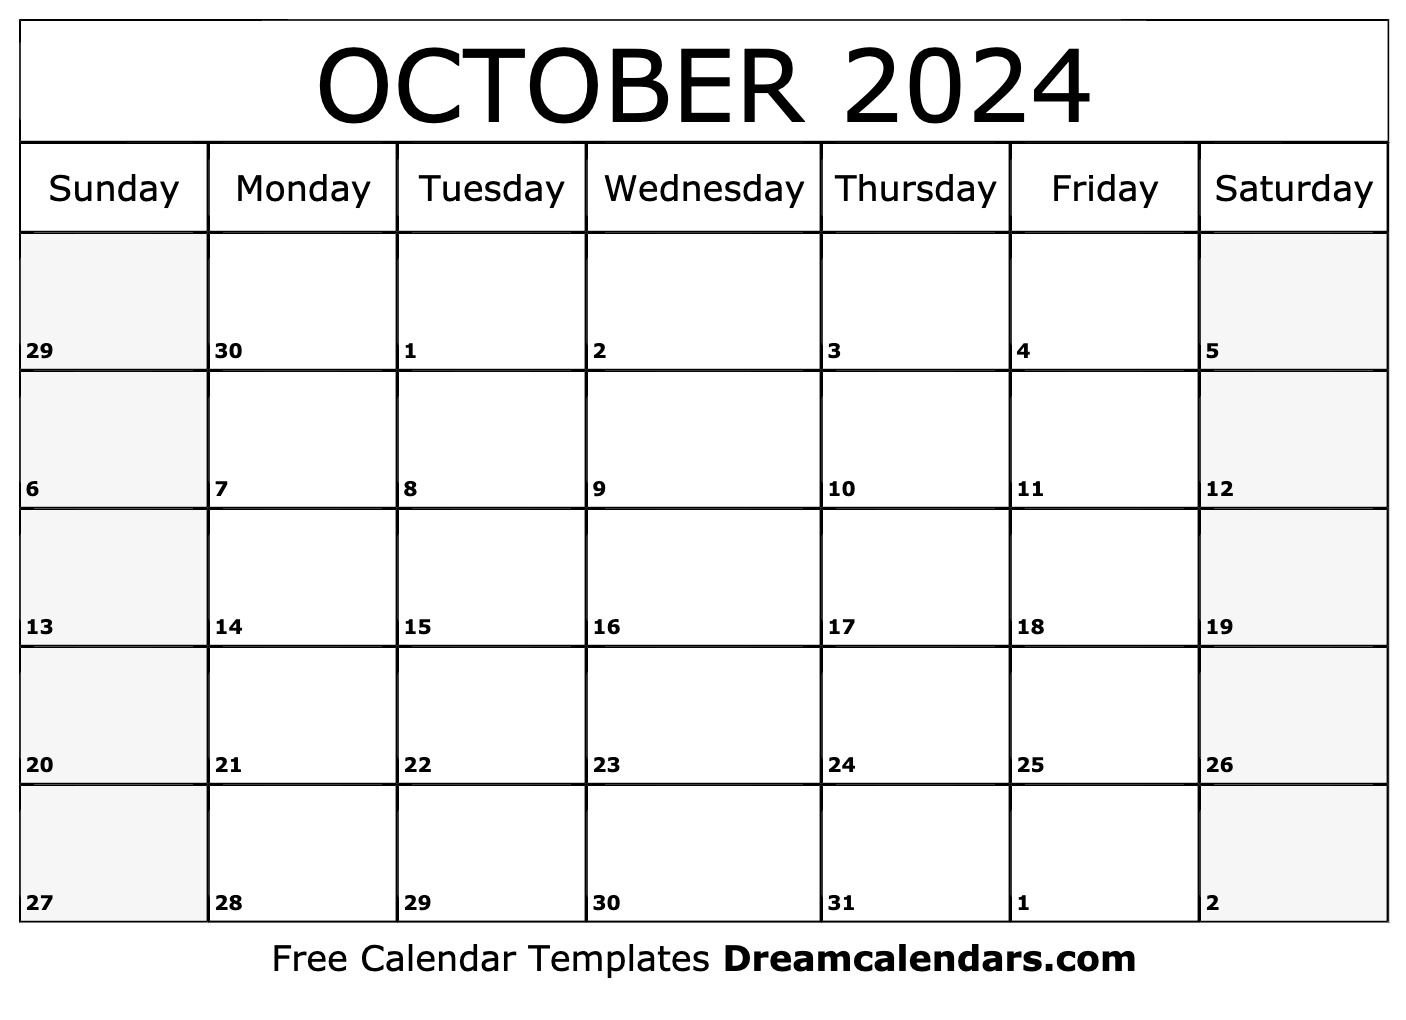 October 2024 Calendar | Free Blank Printable With Holidays for Calendar 2024 October Printable